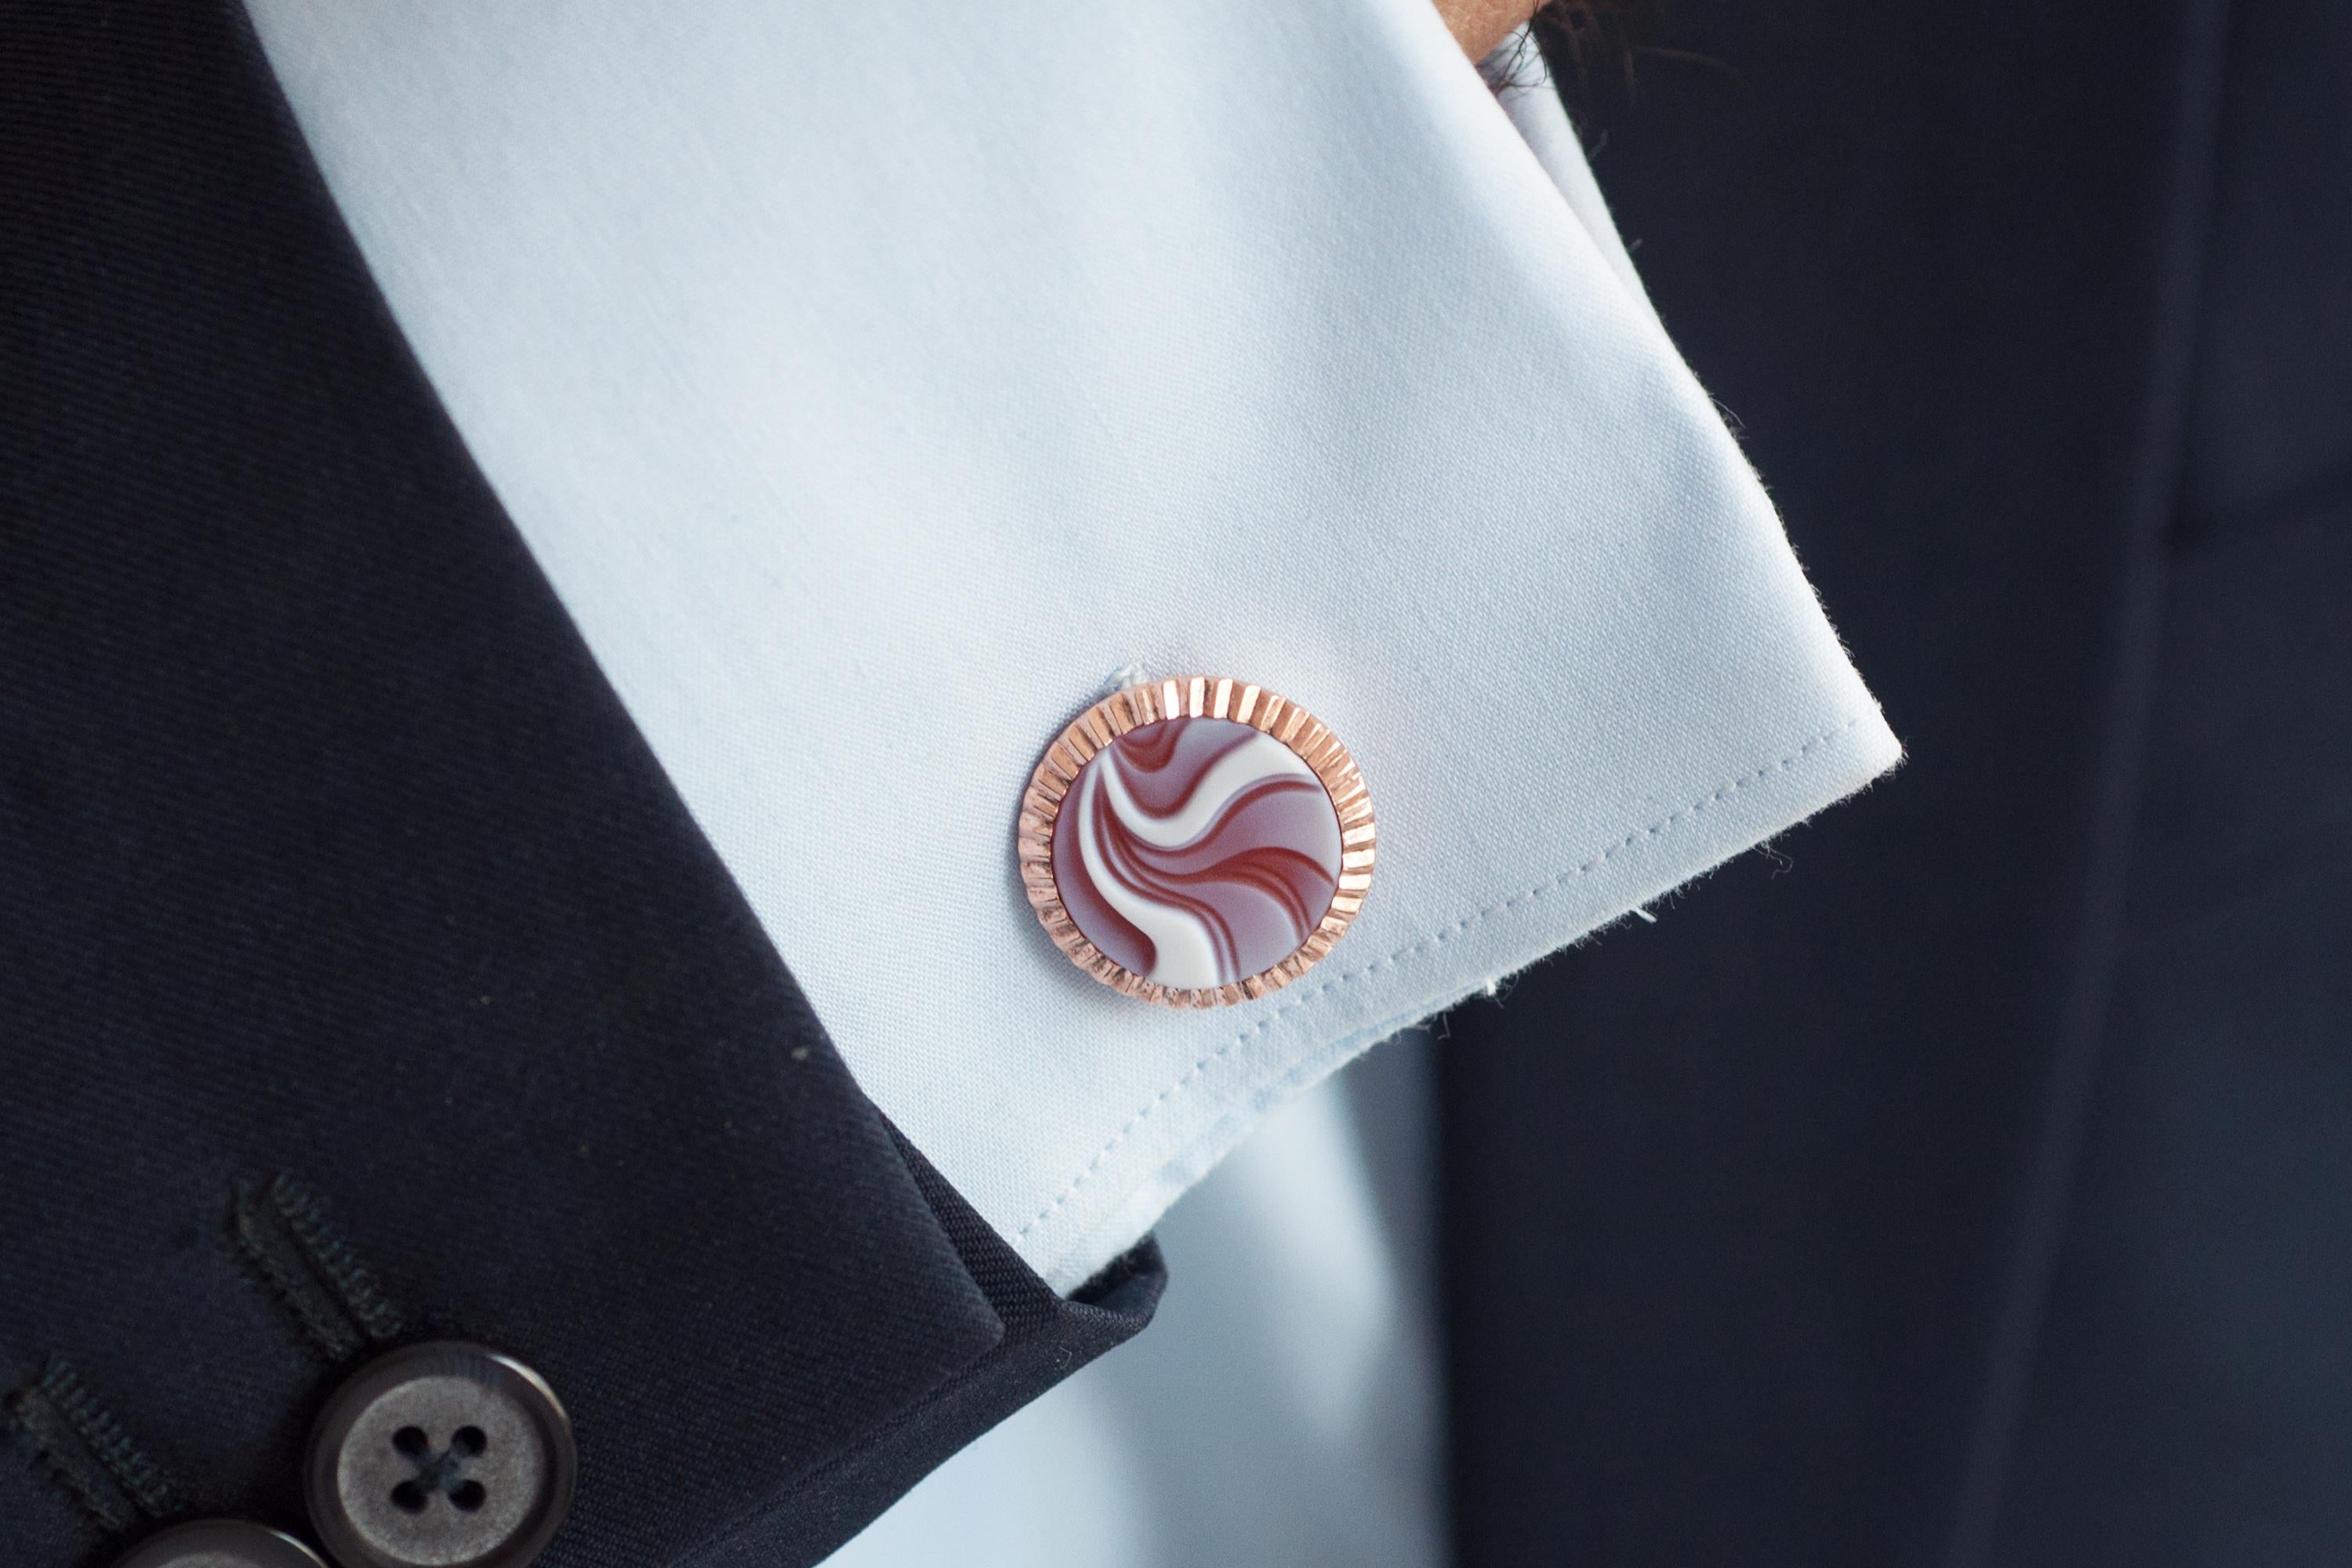 These exquisite pair of contemporary design agate gemstone carving cufflinks made in sterling silver is delight for the wearer! Hand carved in the relief of a natural agate these unisex cufflinks are a contemporary expression for the modern man or